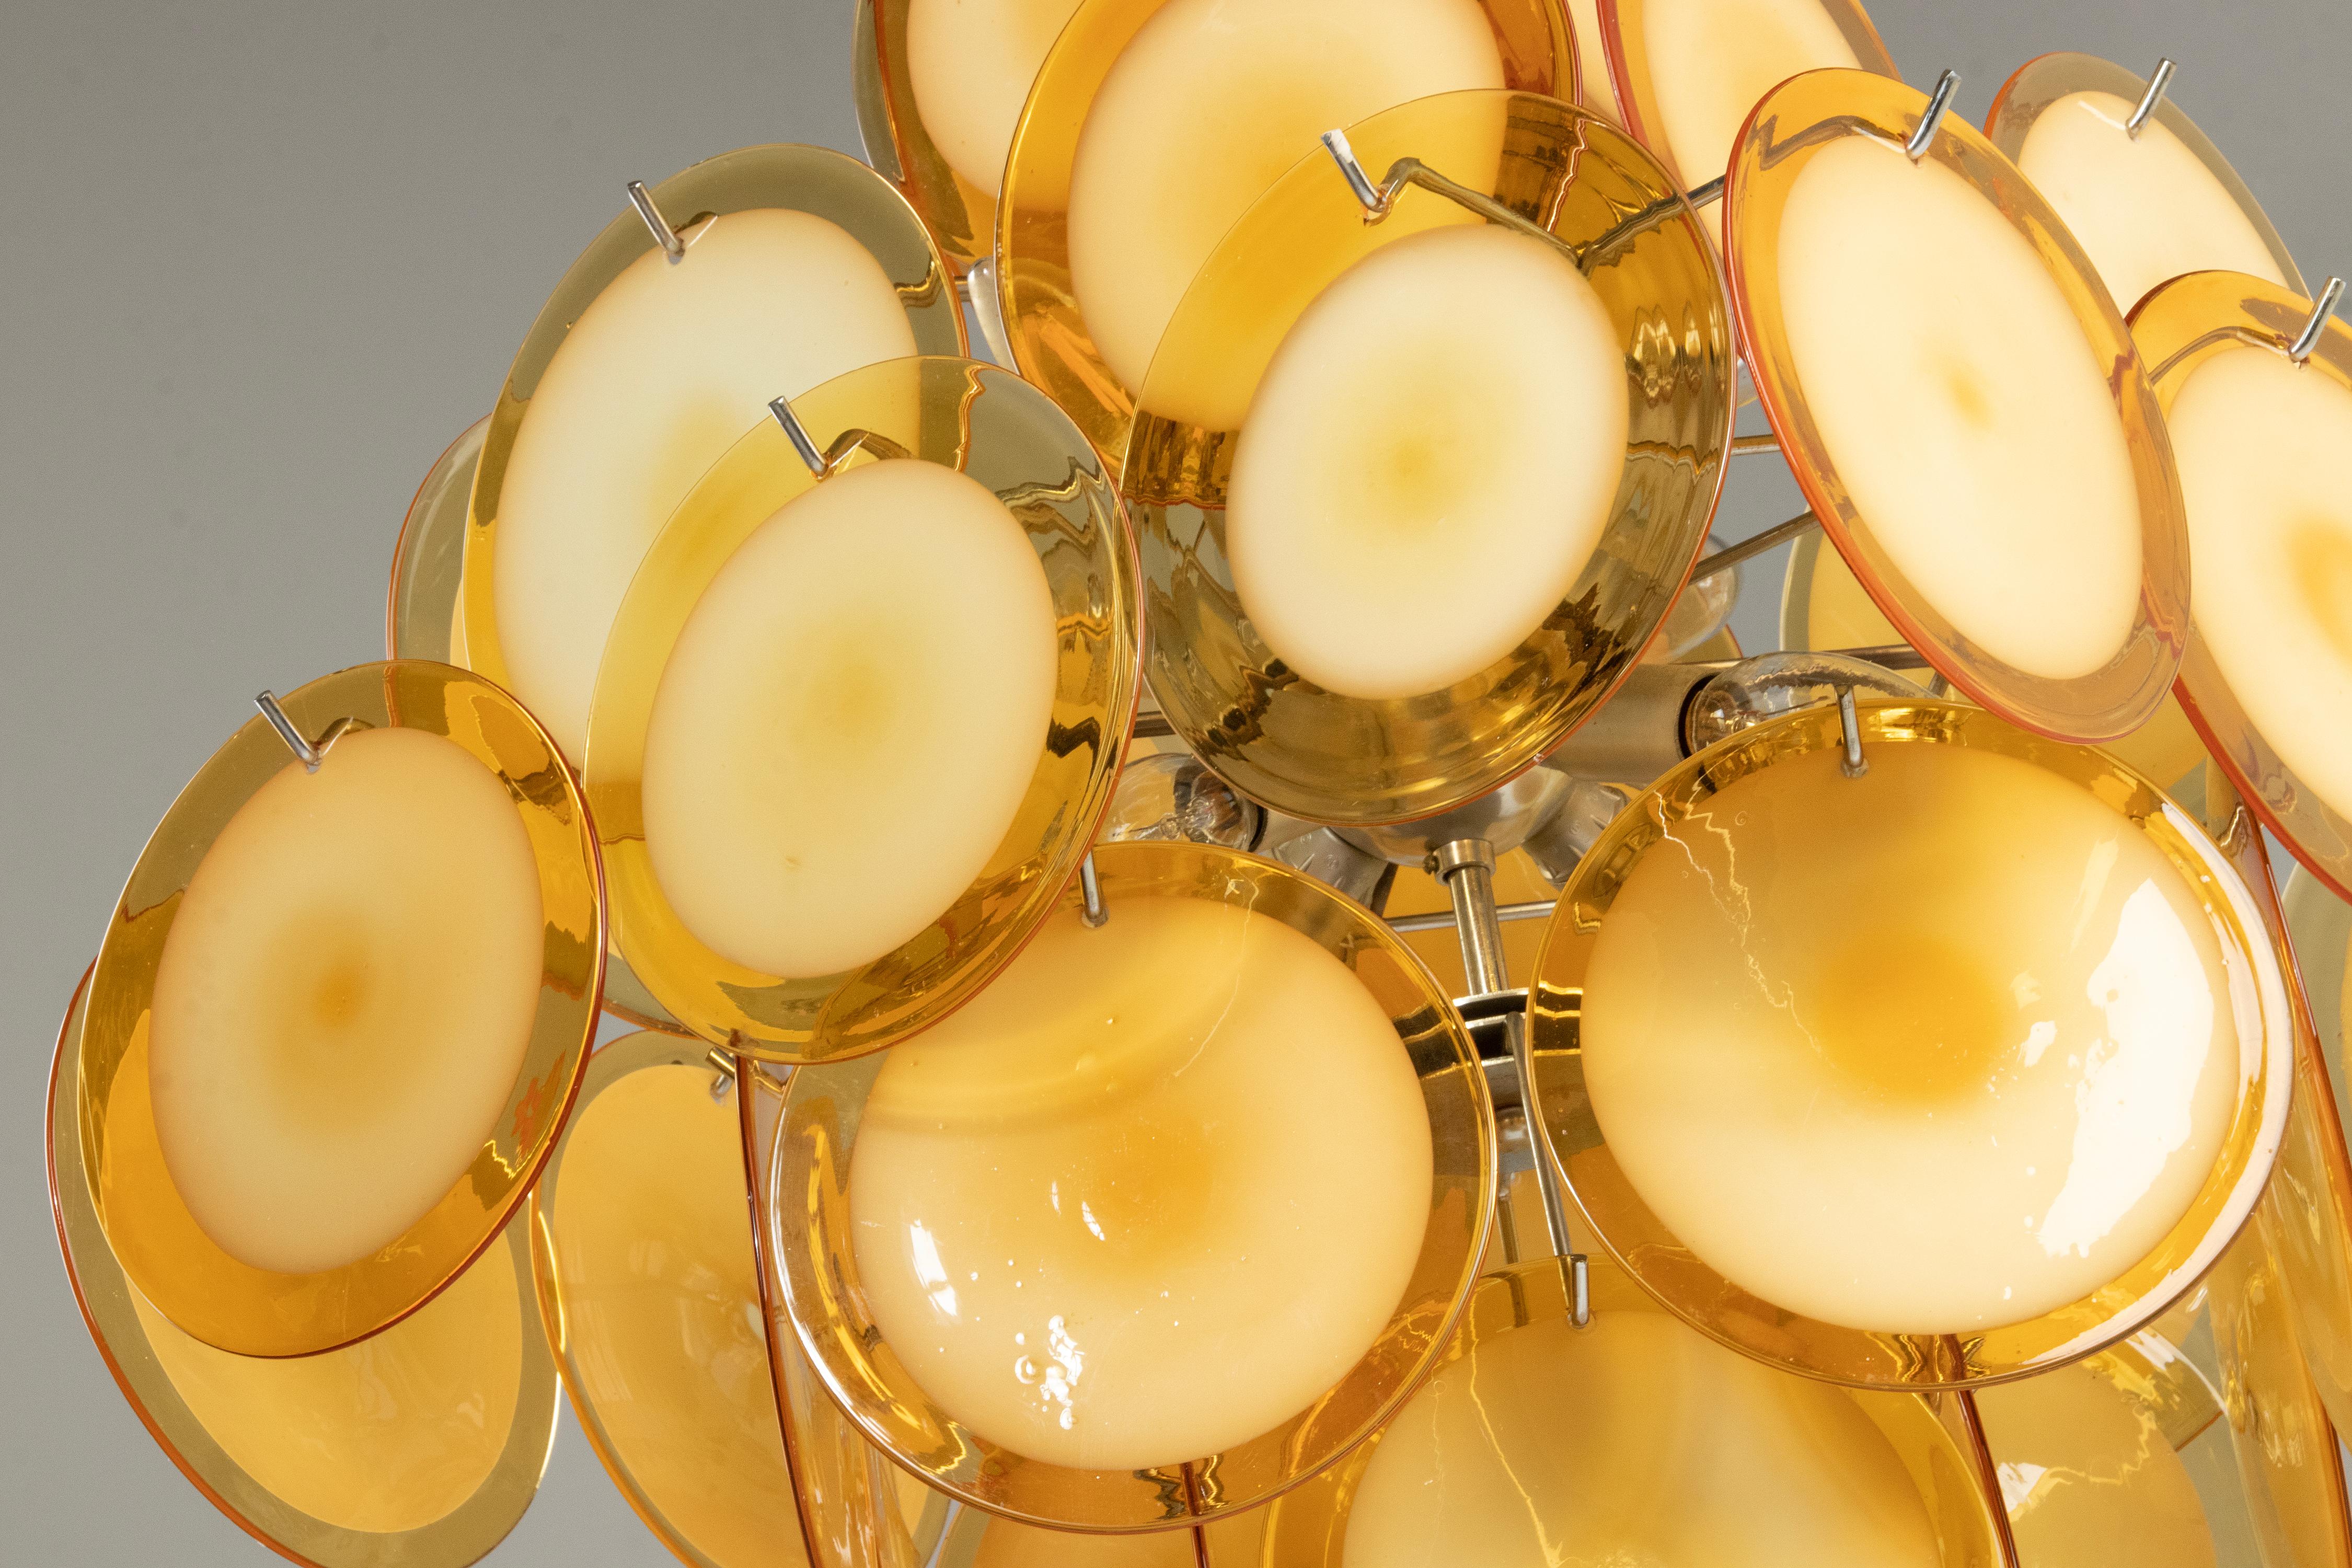 An Italian Murano chandelier attributed to Vistosi. The chandelier has 36 hand blown glass disks made of yellow/orange Murano glass, hanging in a metal frame. The lamp has 8 lights (E14 sockets), which gives an atmospheric light. Made in Italy